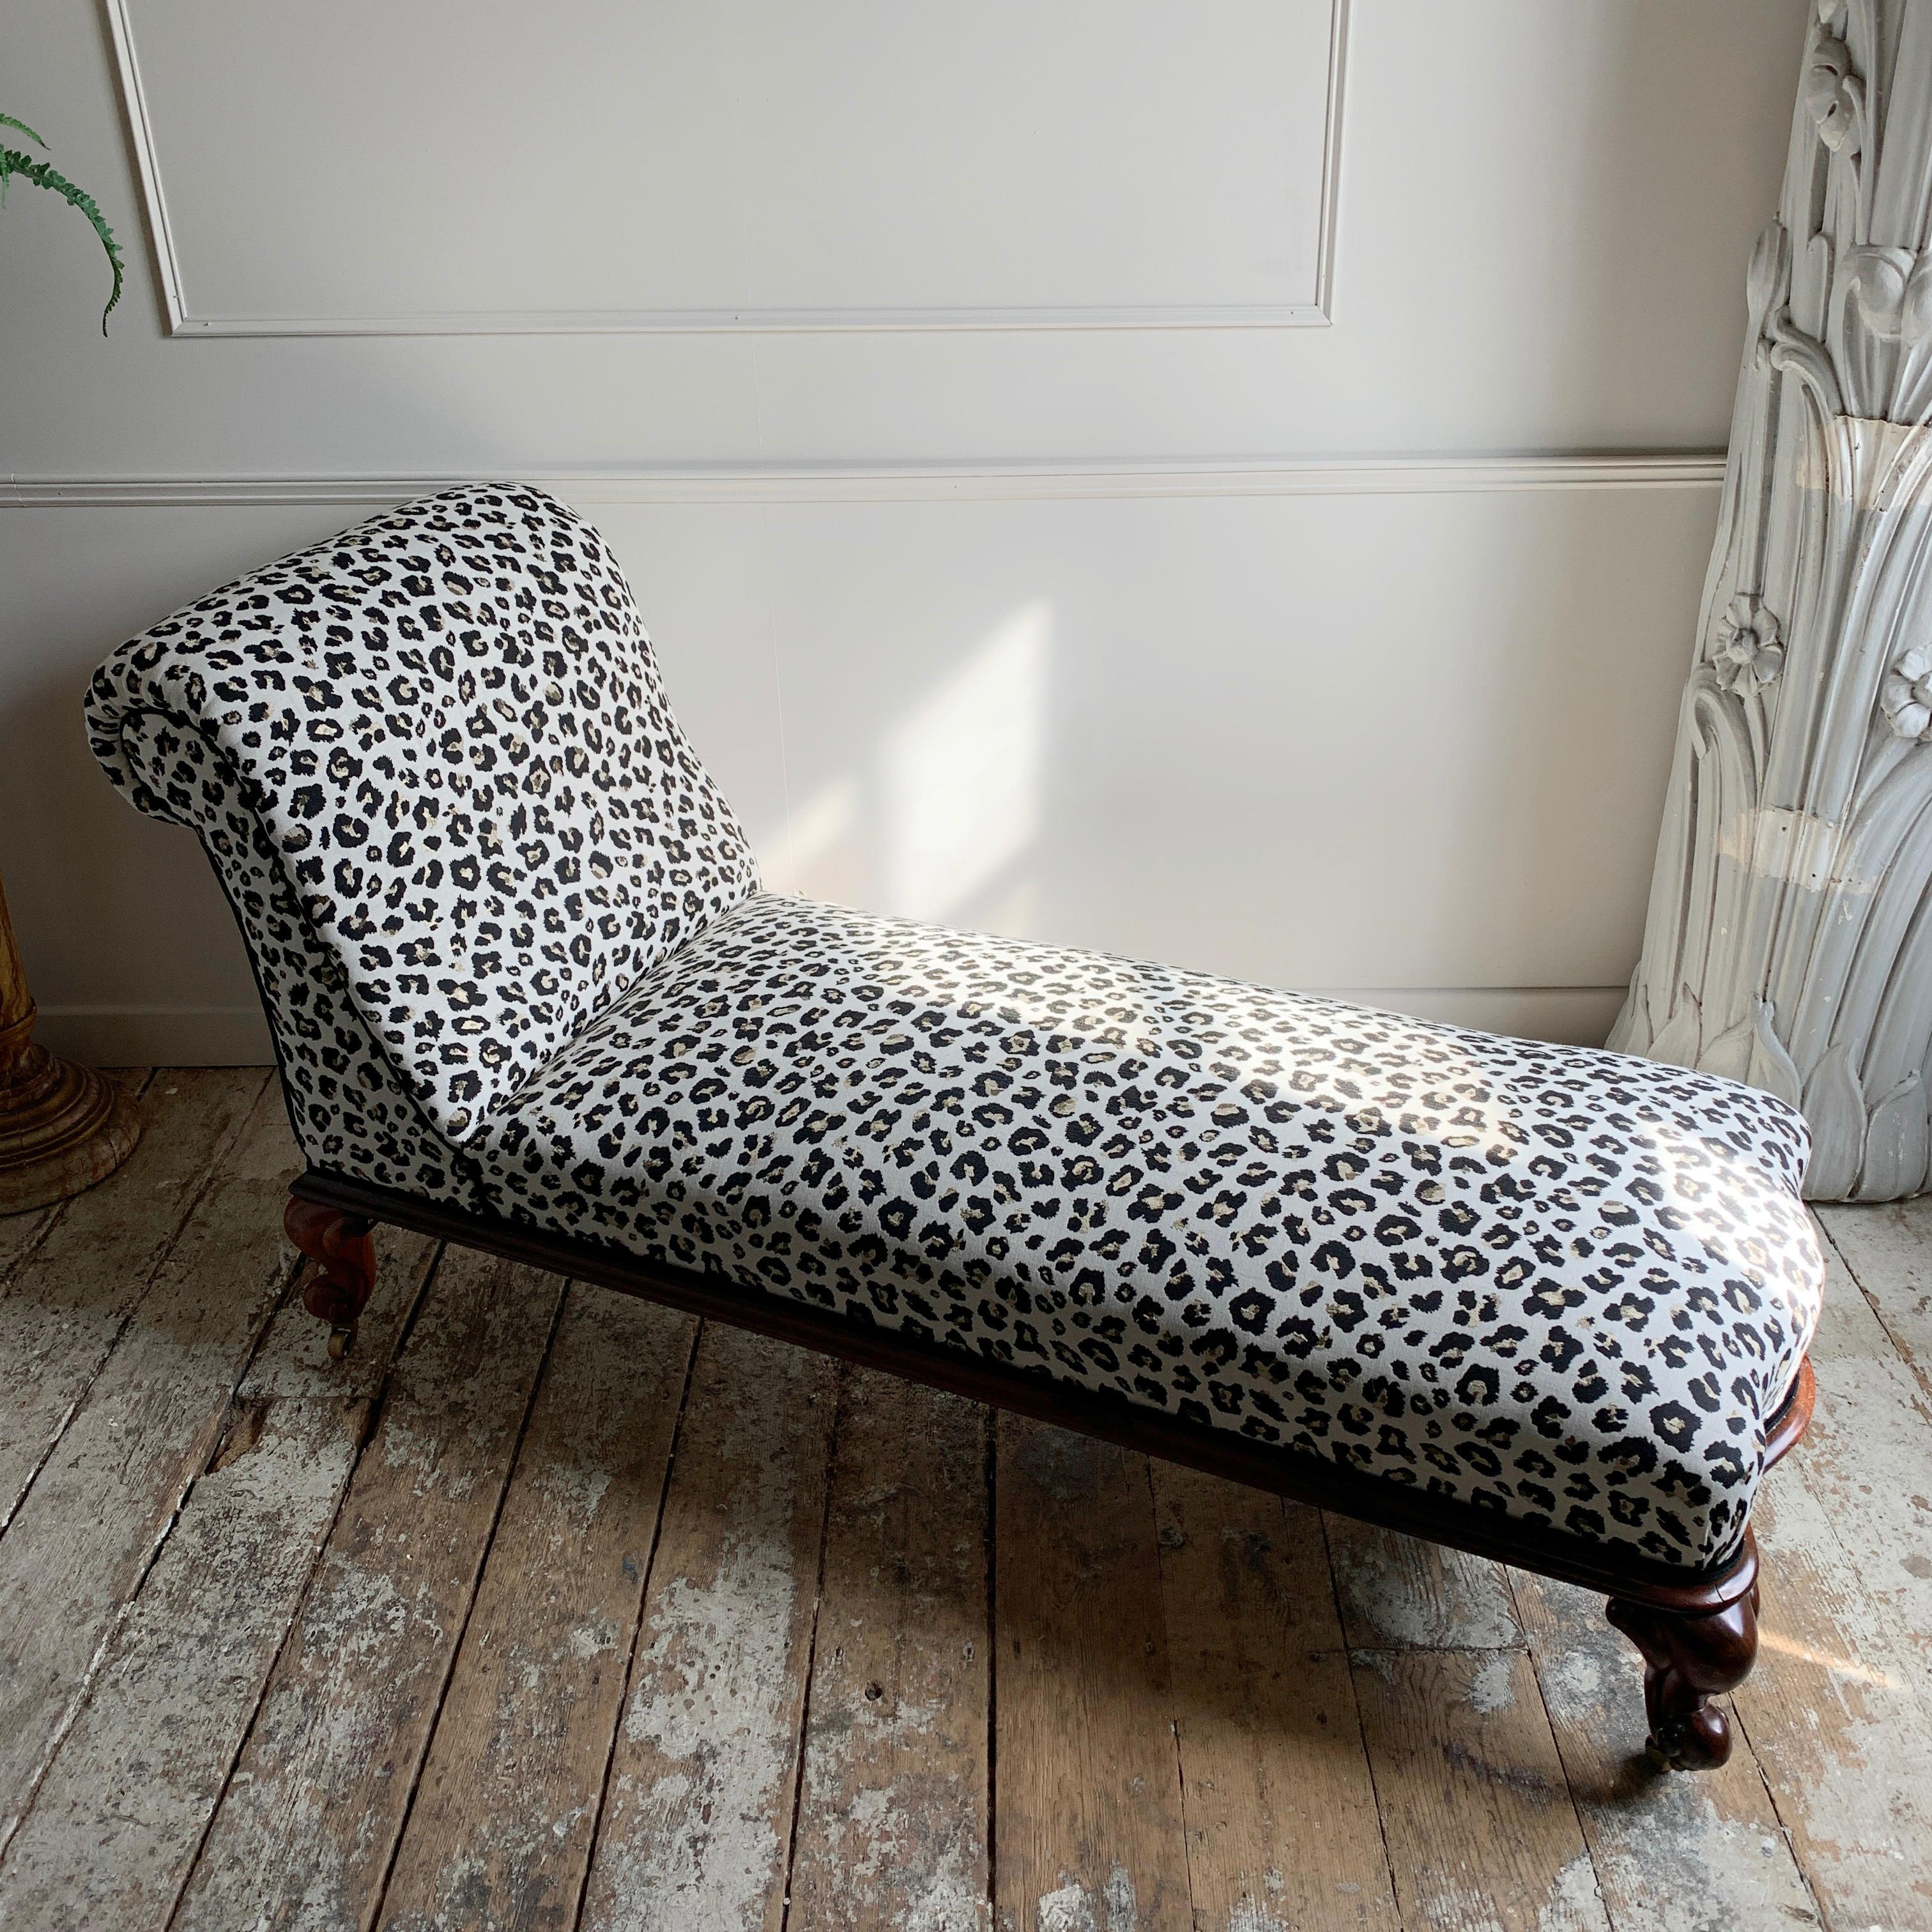 British Antique Victorian Chaise Longue in Woven Leopard Jacquard For Sale